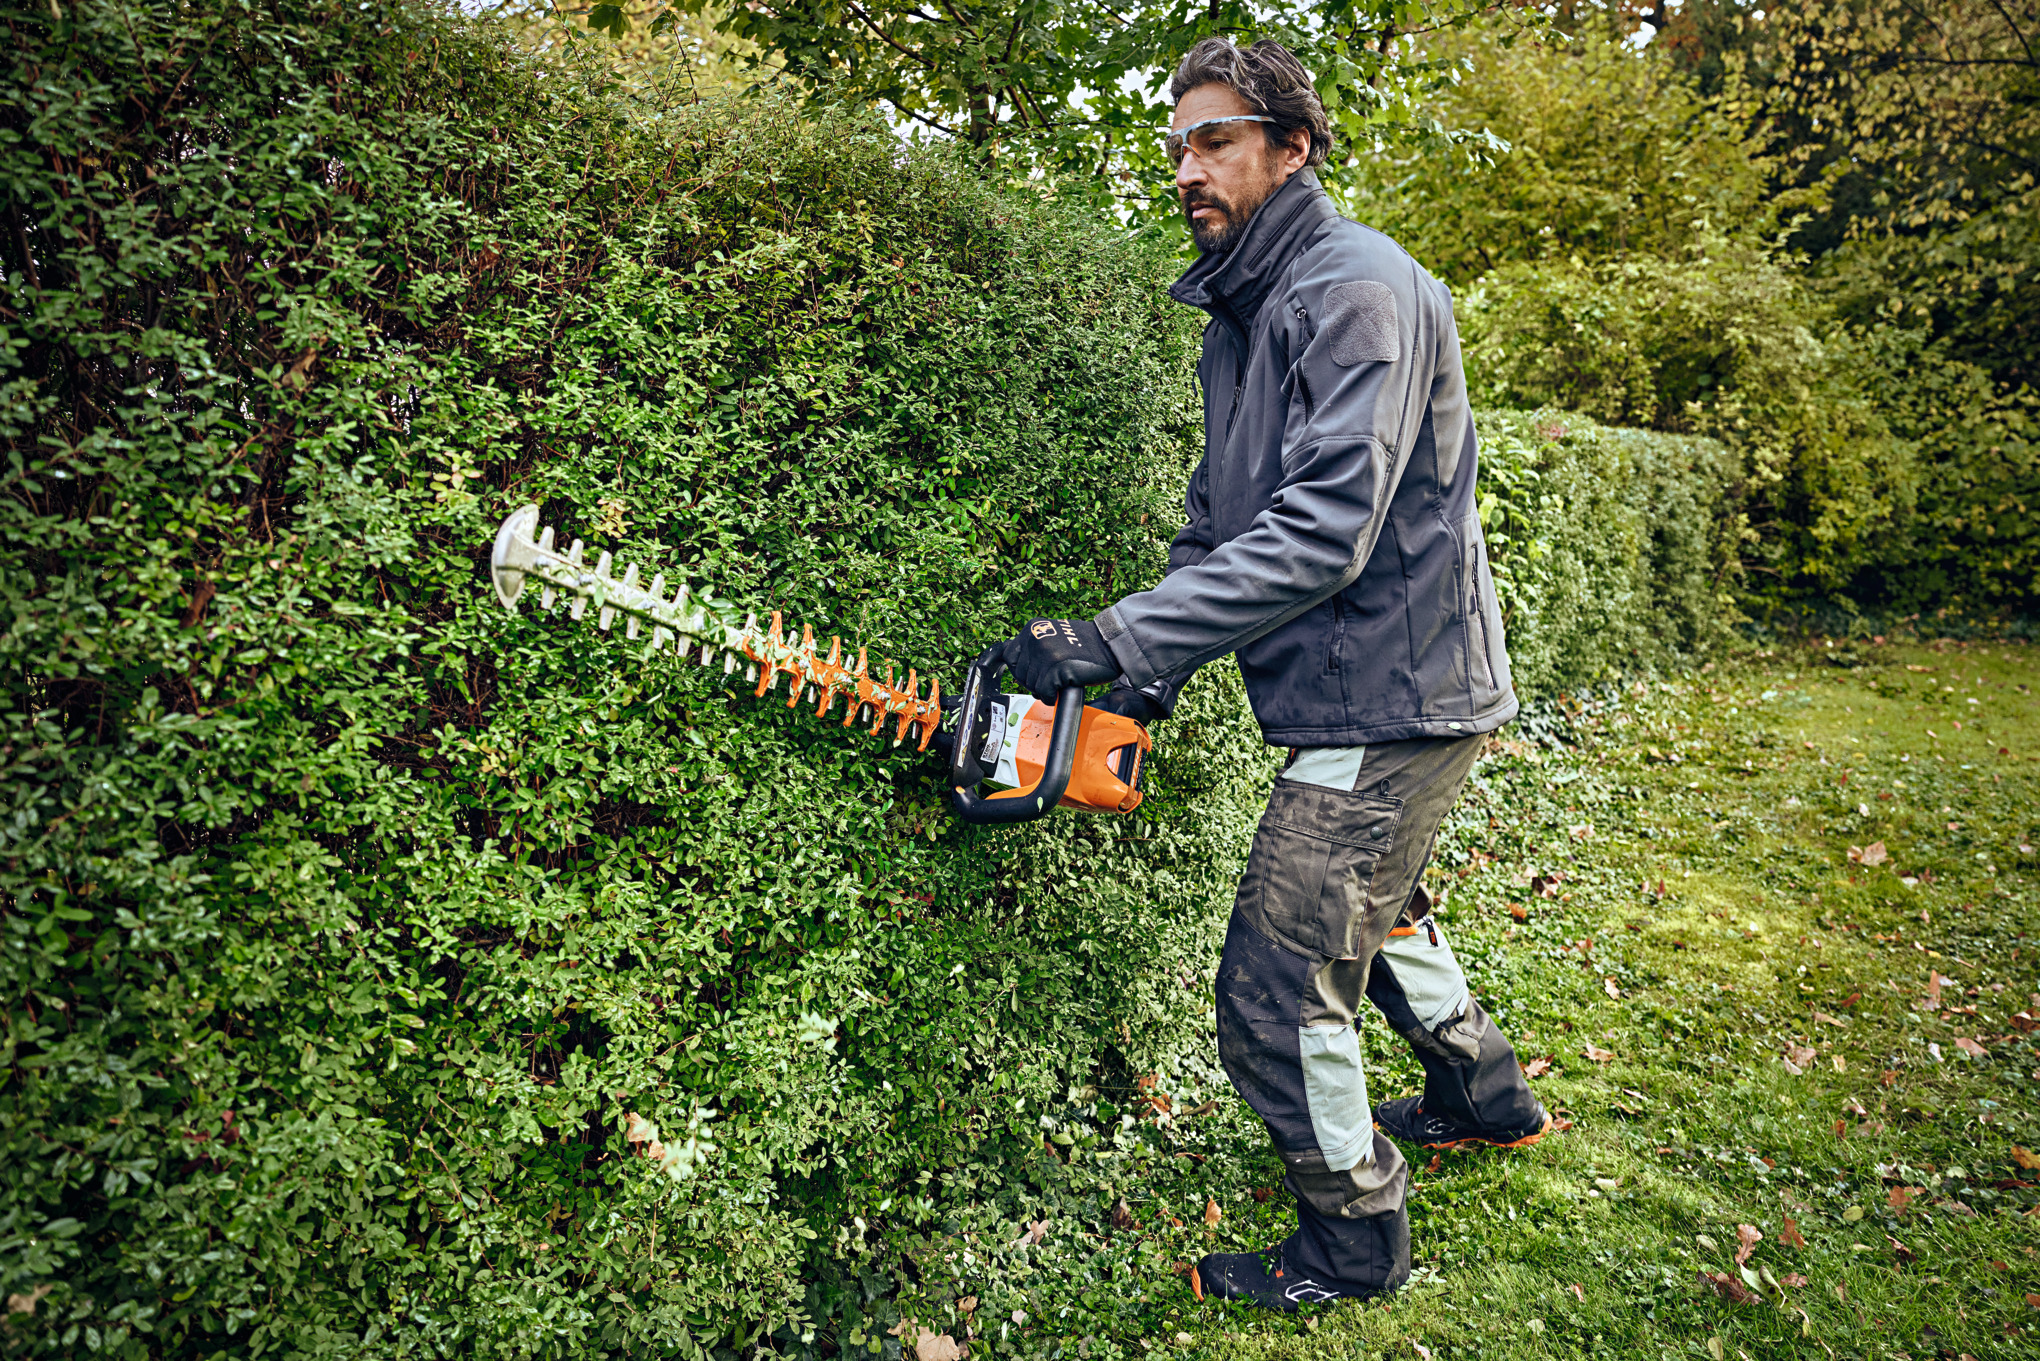 HSA 100 Cordless Hedge Trimmer